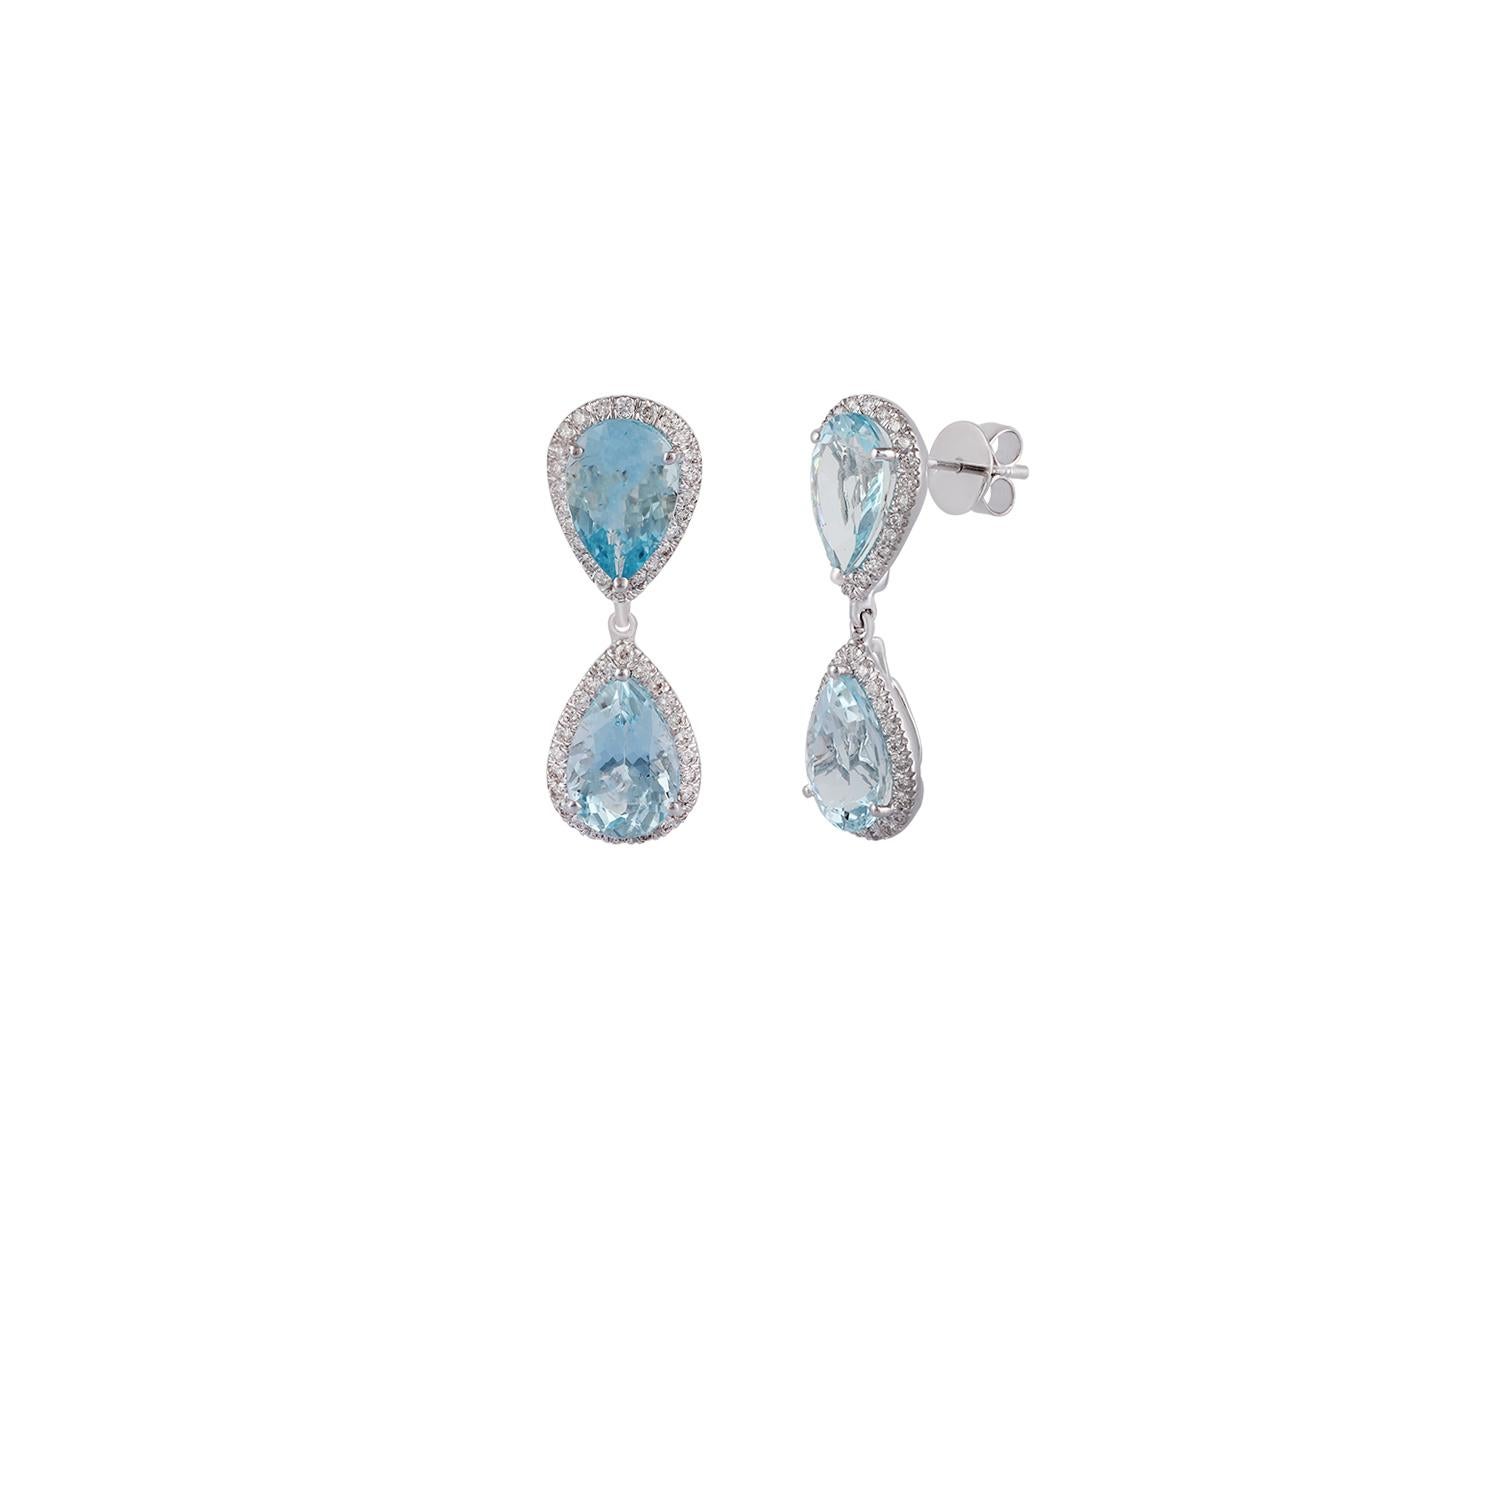 Contemporary Aquamarine and Diamond Earring Studded in 18 Karat White Gold